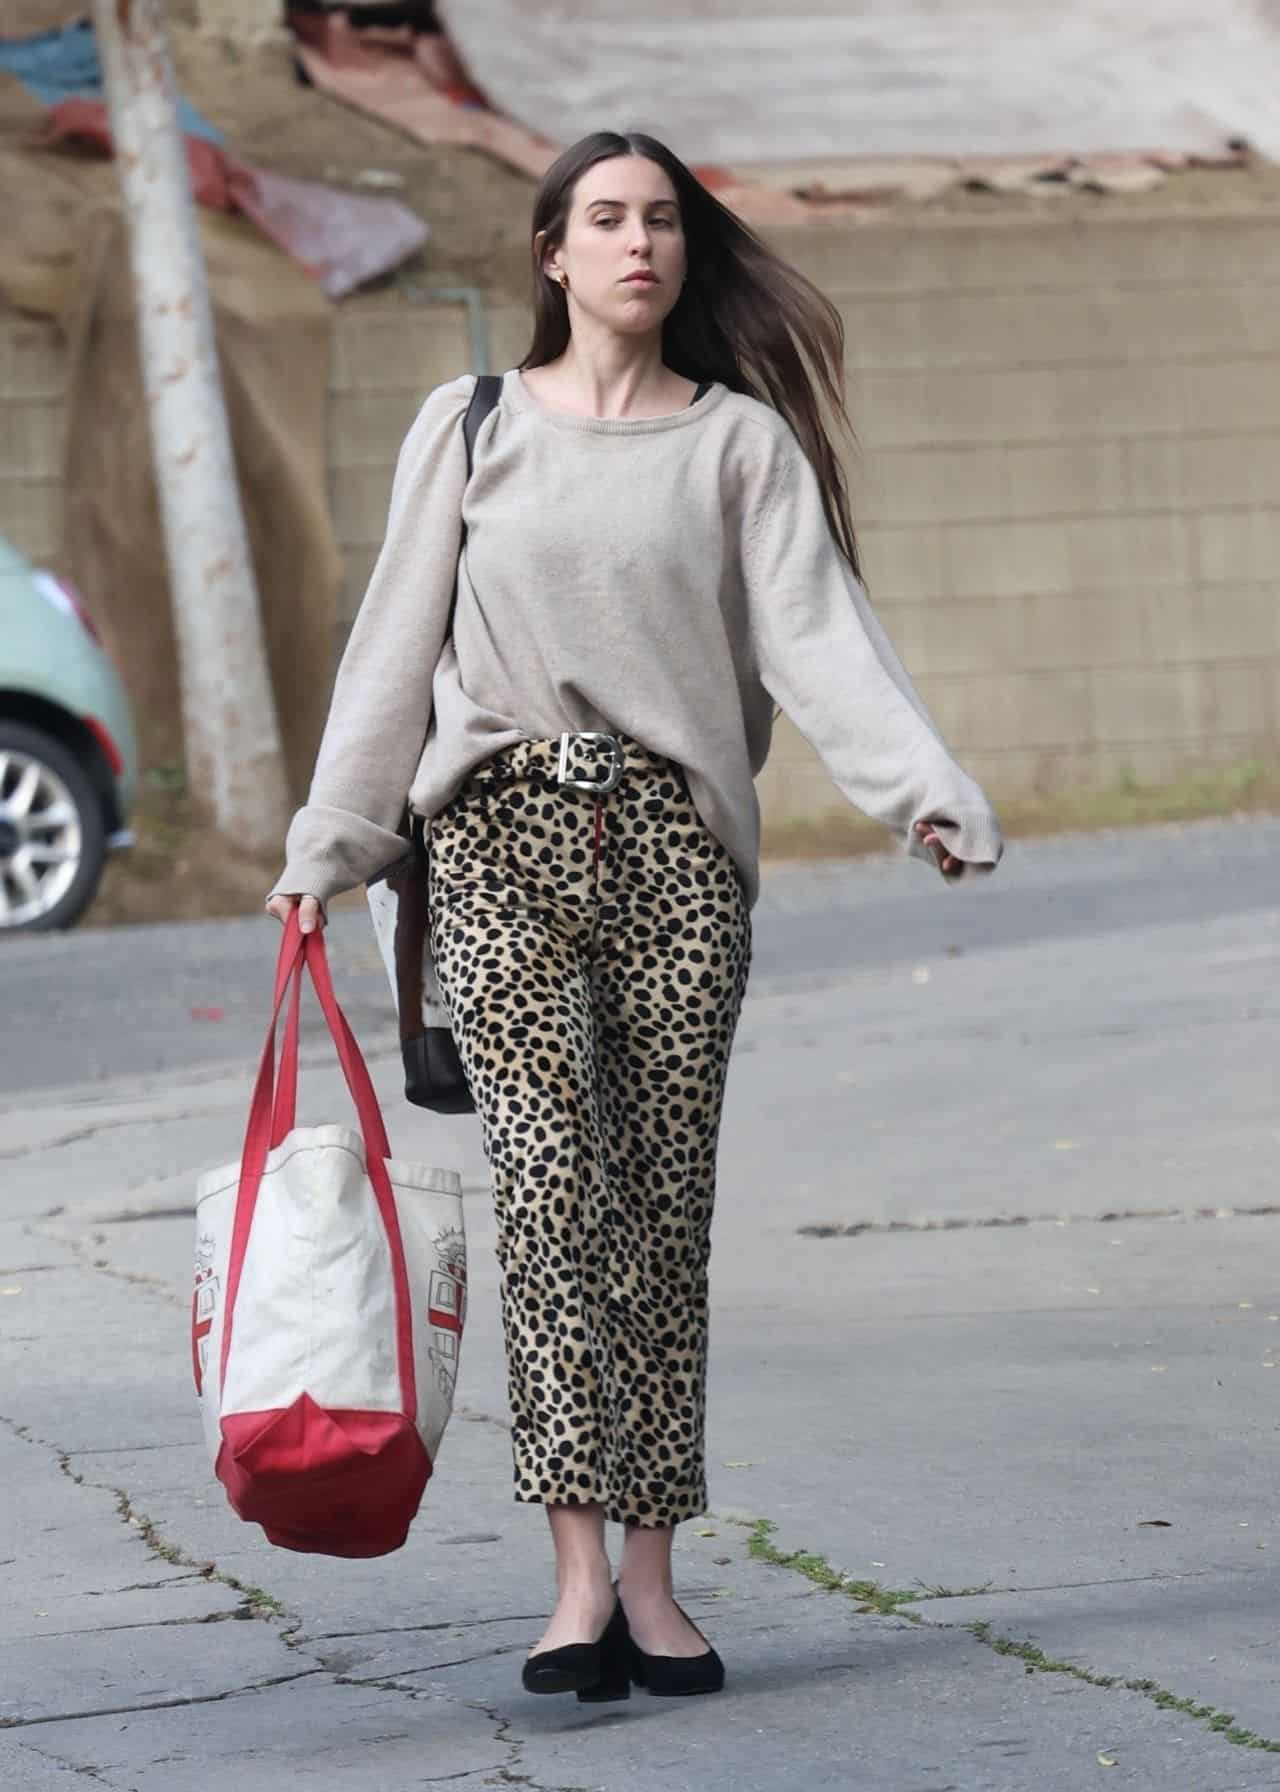 Scout Willis Looks Chic in a Cashmere Sweater and Leopard Print Pants in LA